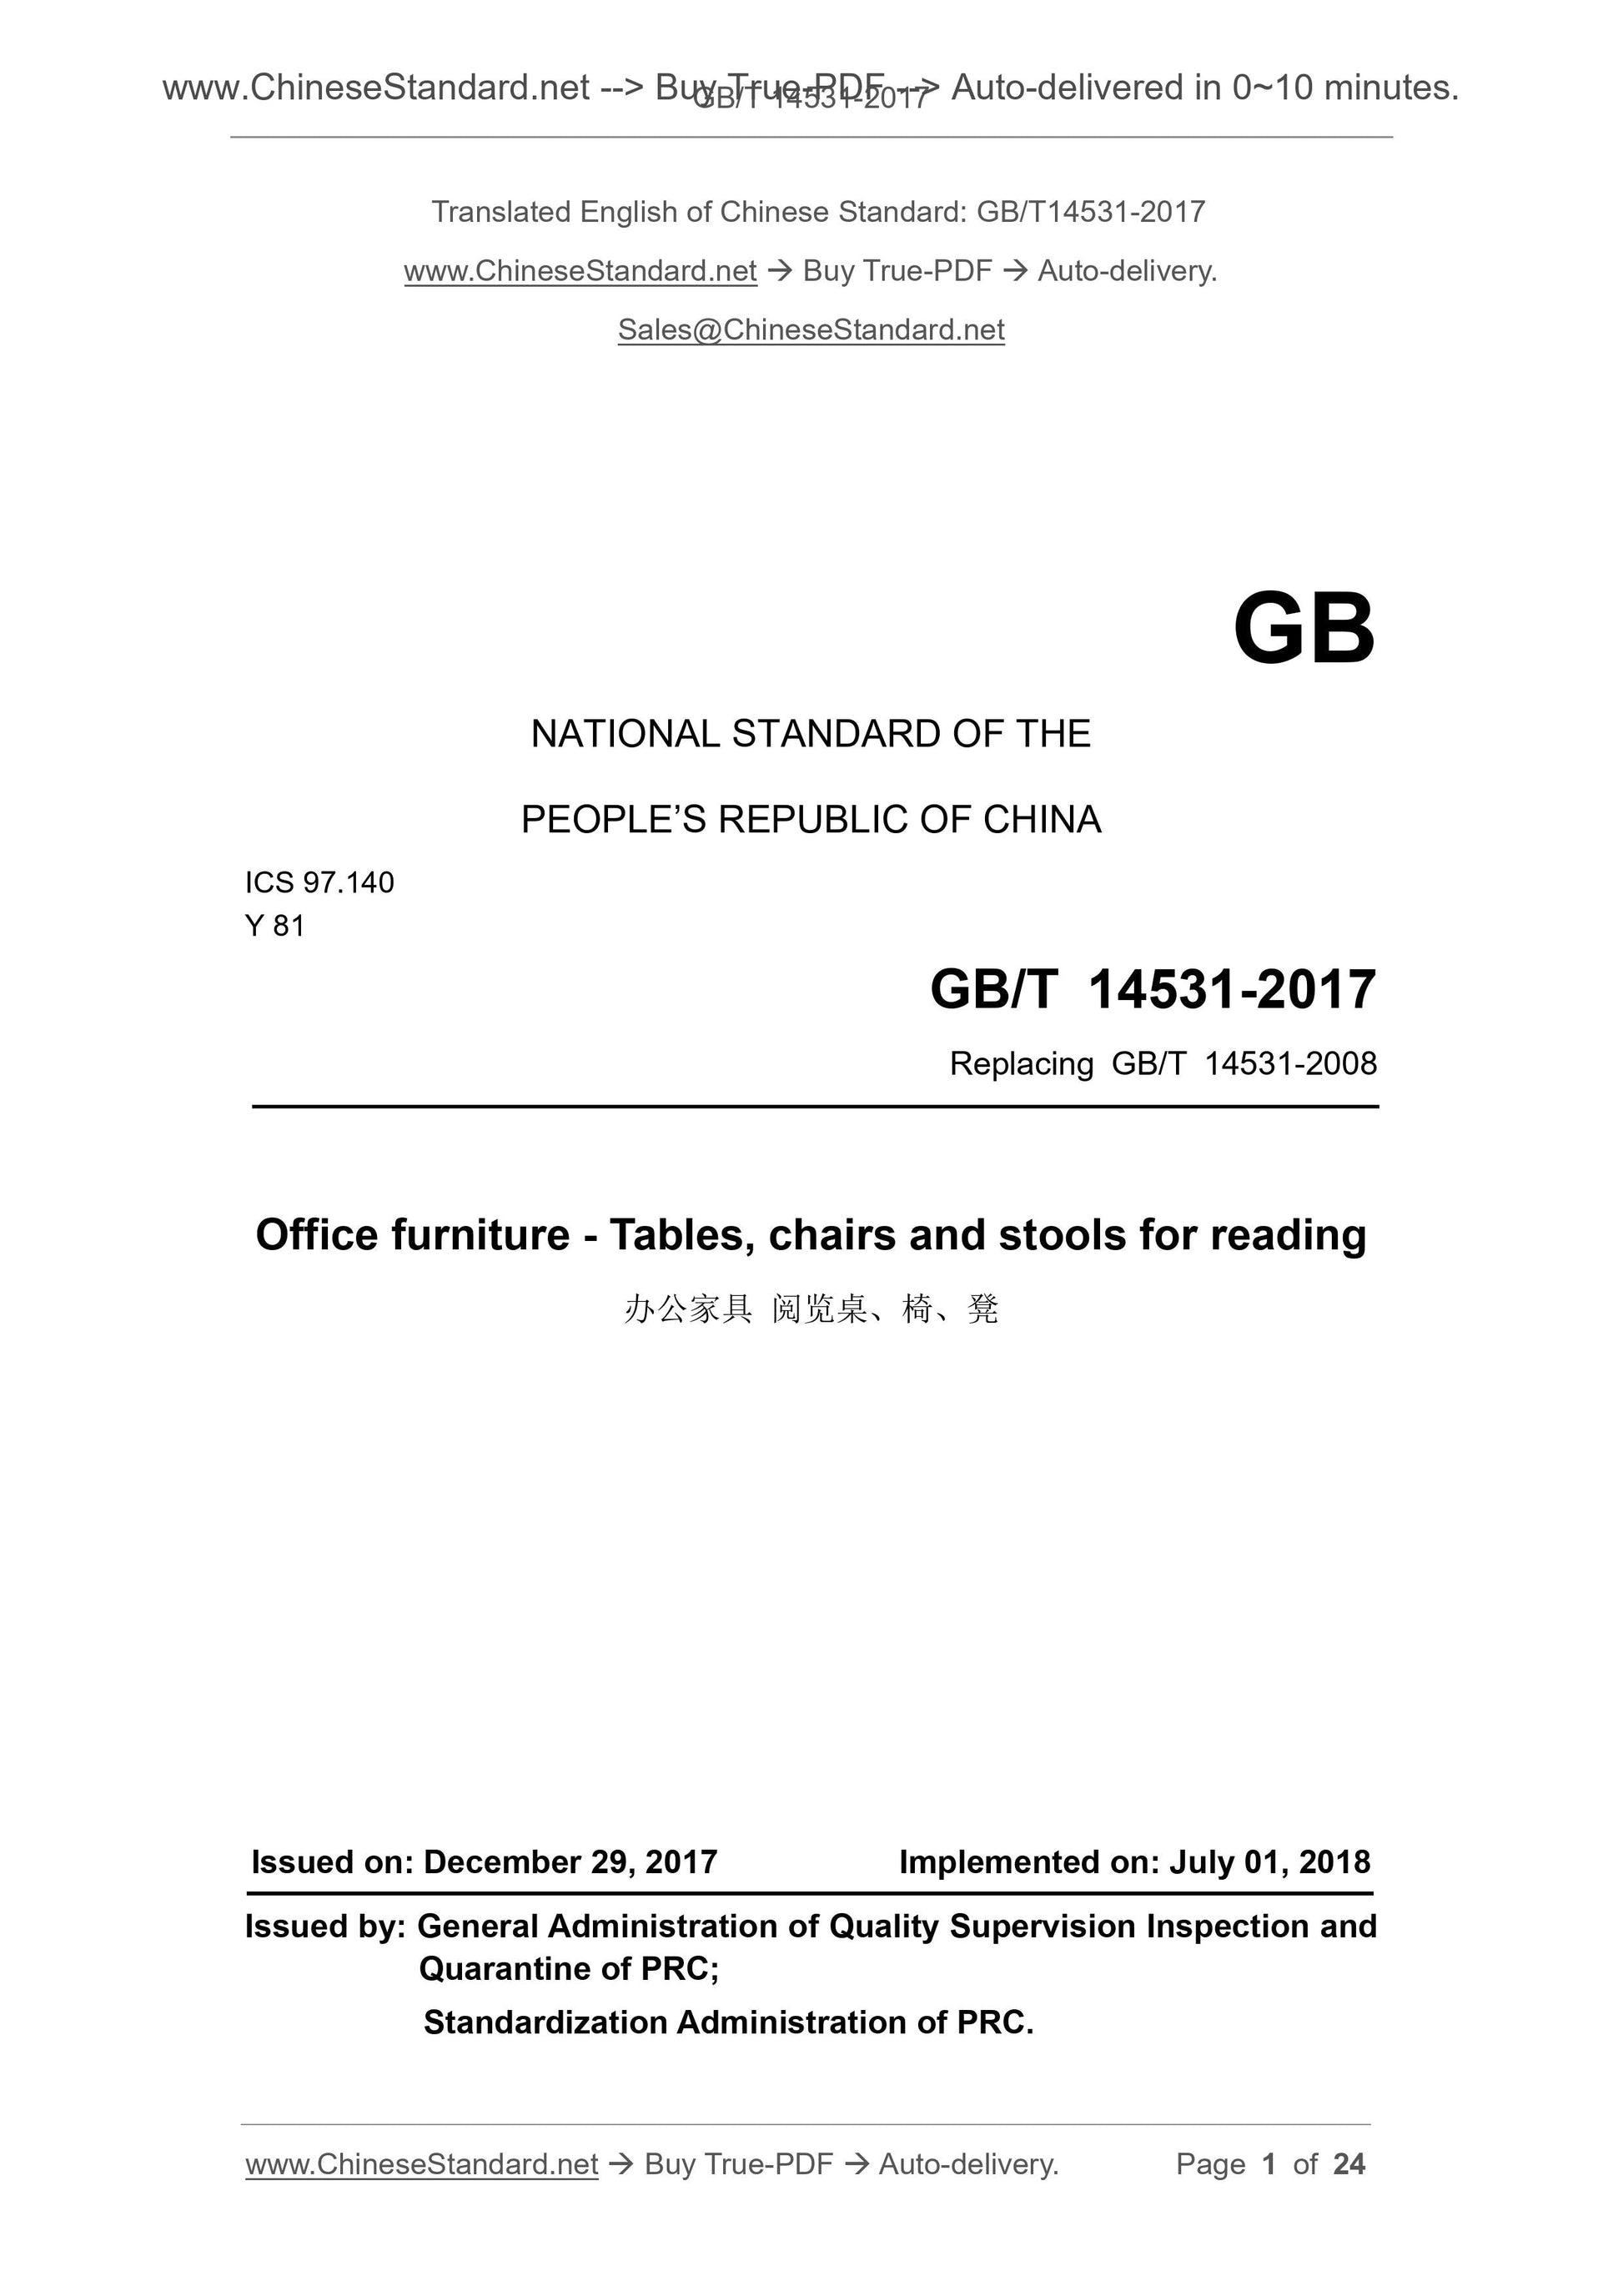 GB/T 14531-2017 Page 1